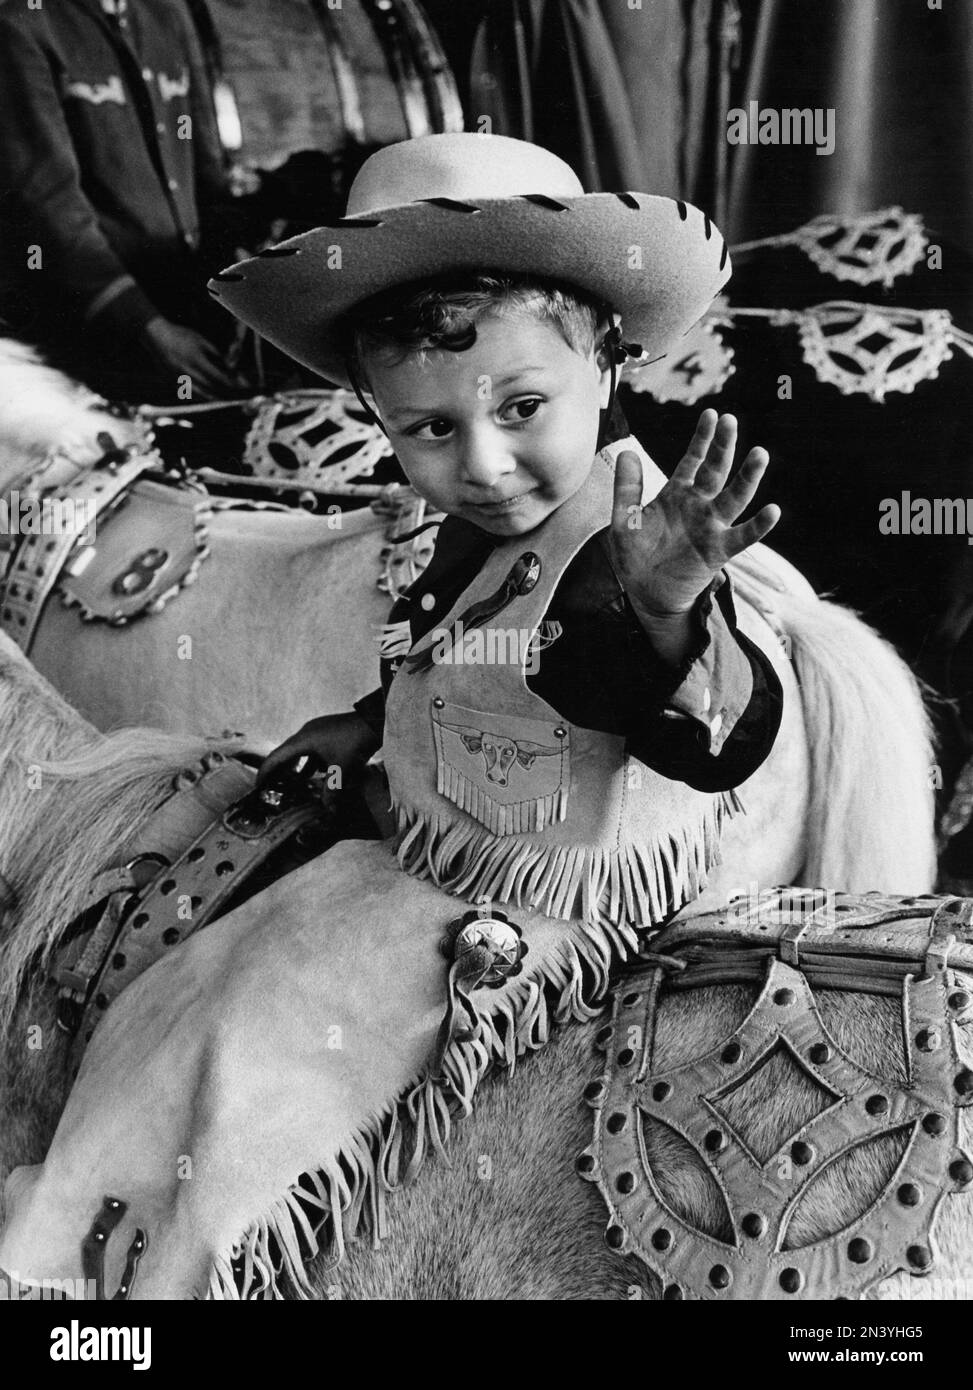 In the 1960s. A boy on a horse dressed in cowboy clothes and hat. Sweden 1964 Stock Photo